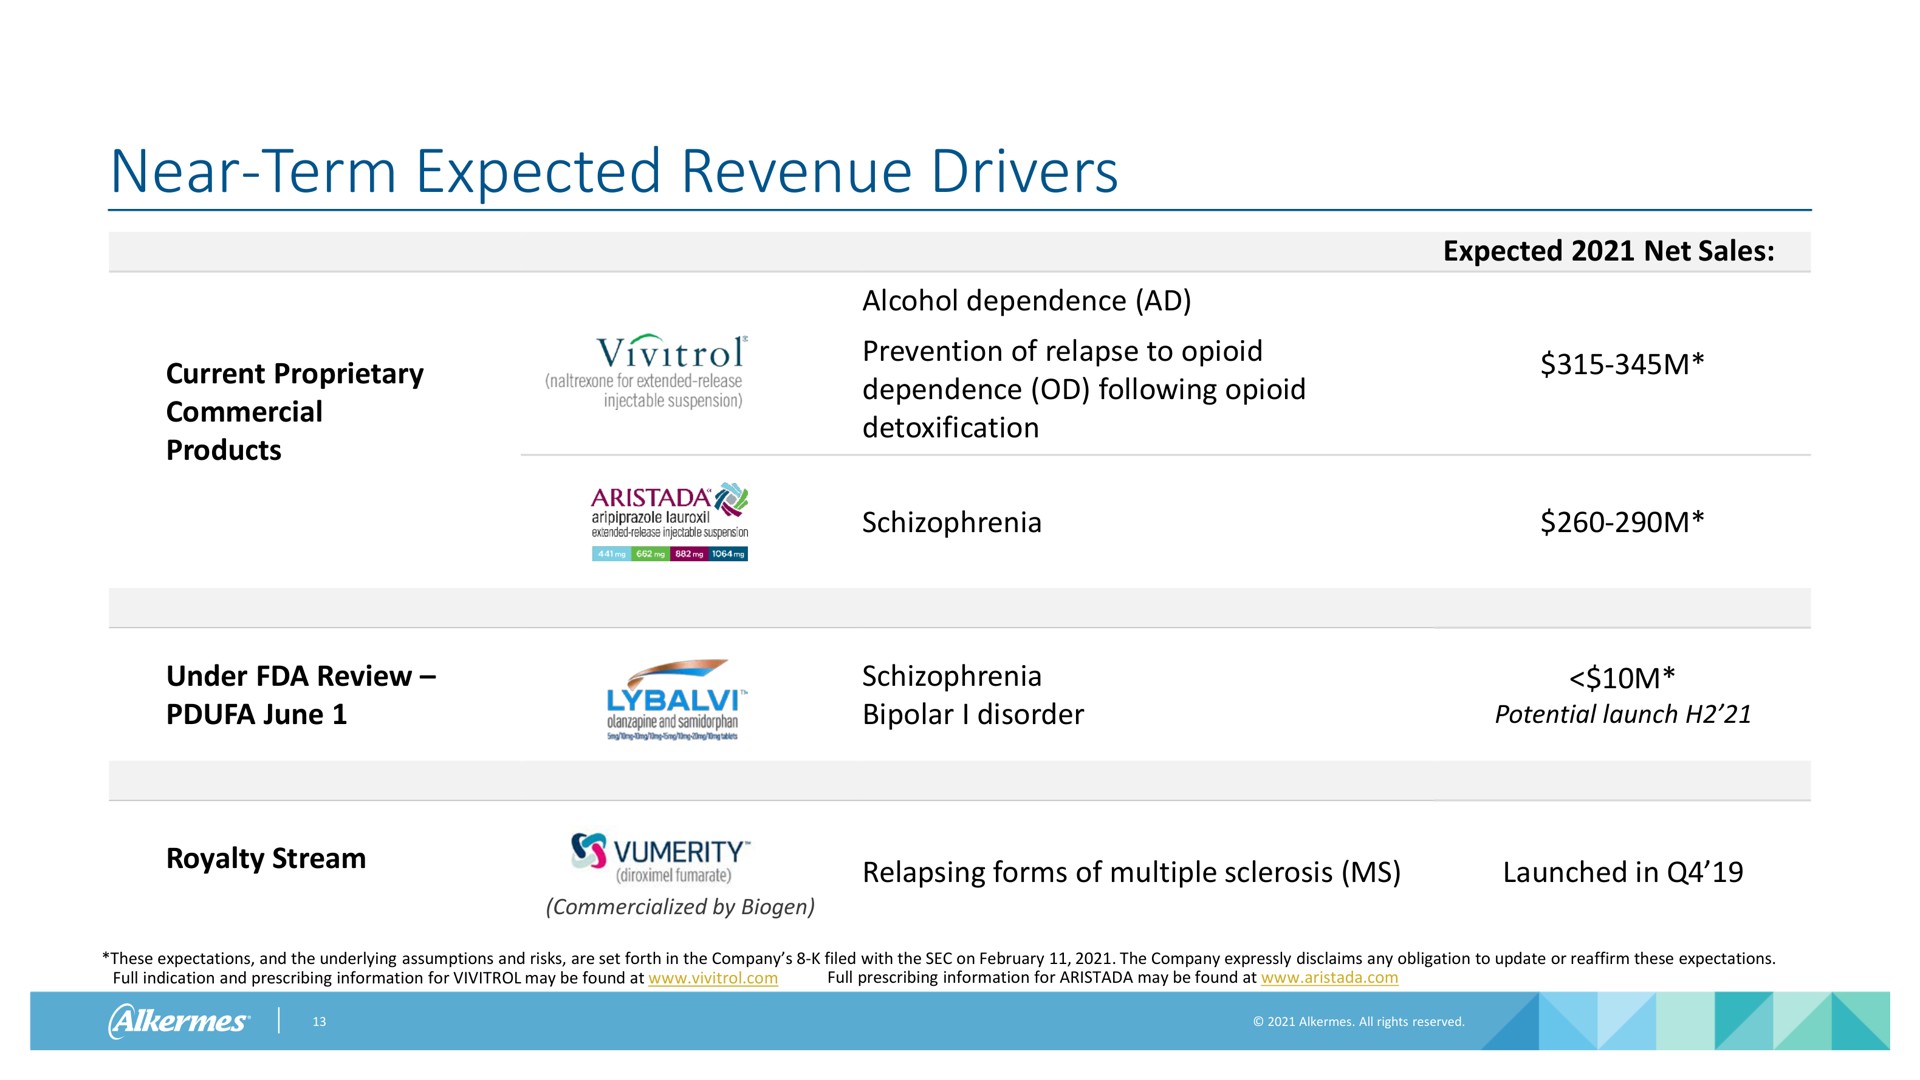 near term expected revenue drivers current proprietary commercial products alcohol dependence prevention of relapse to dependence following detoxification expected net sales schizophrenia under review june schizophrenia bipolar i disorder potential launch royalty stream commercialized by biogen relapsing forms of multiple sclerosis launched in these expectations and the underlying assumptions and risks are set forth in the company filed with the sec on the company expressly disclaims any obligation to update or reaffirm these expectations full indication and prescribing information for may be found at full prescribing information for may be found at | Alkermes